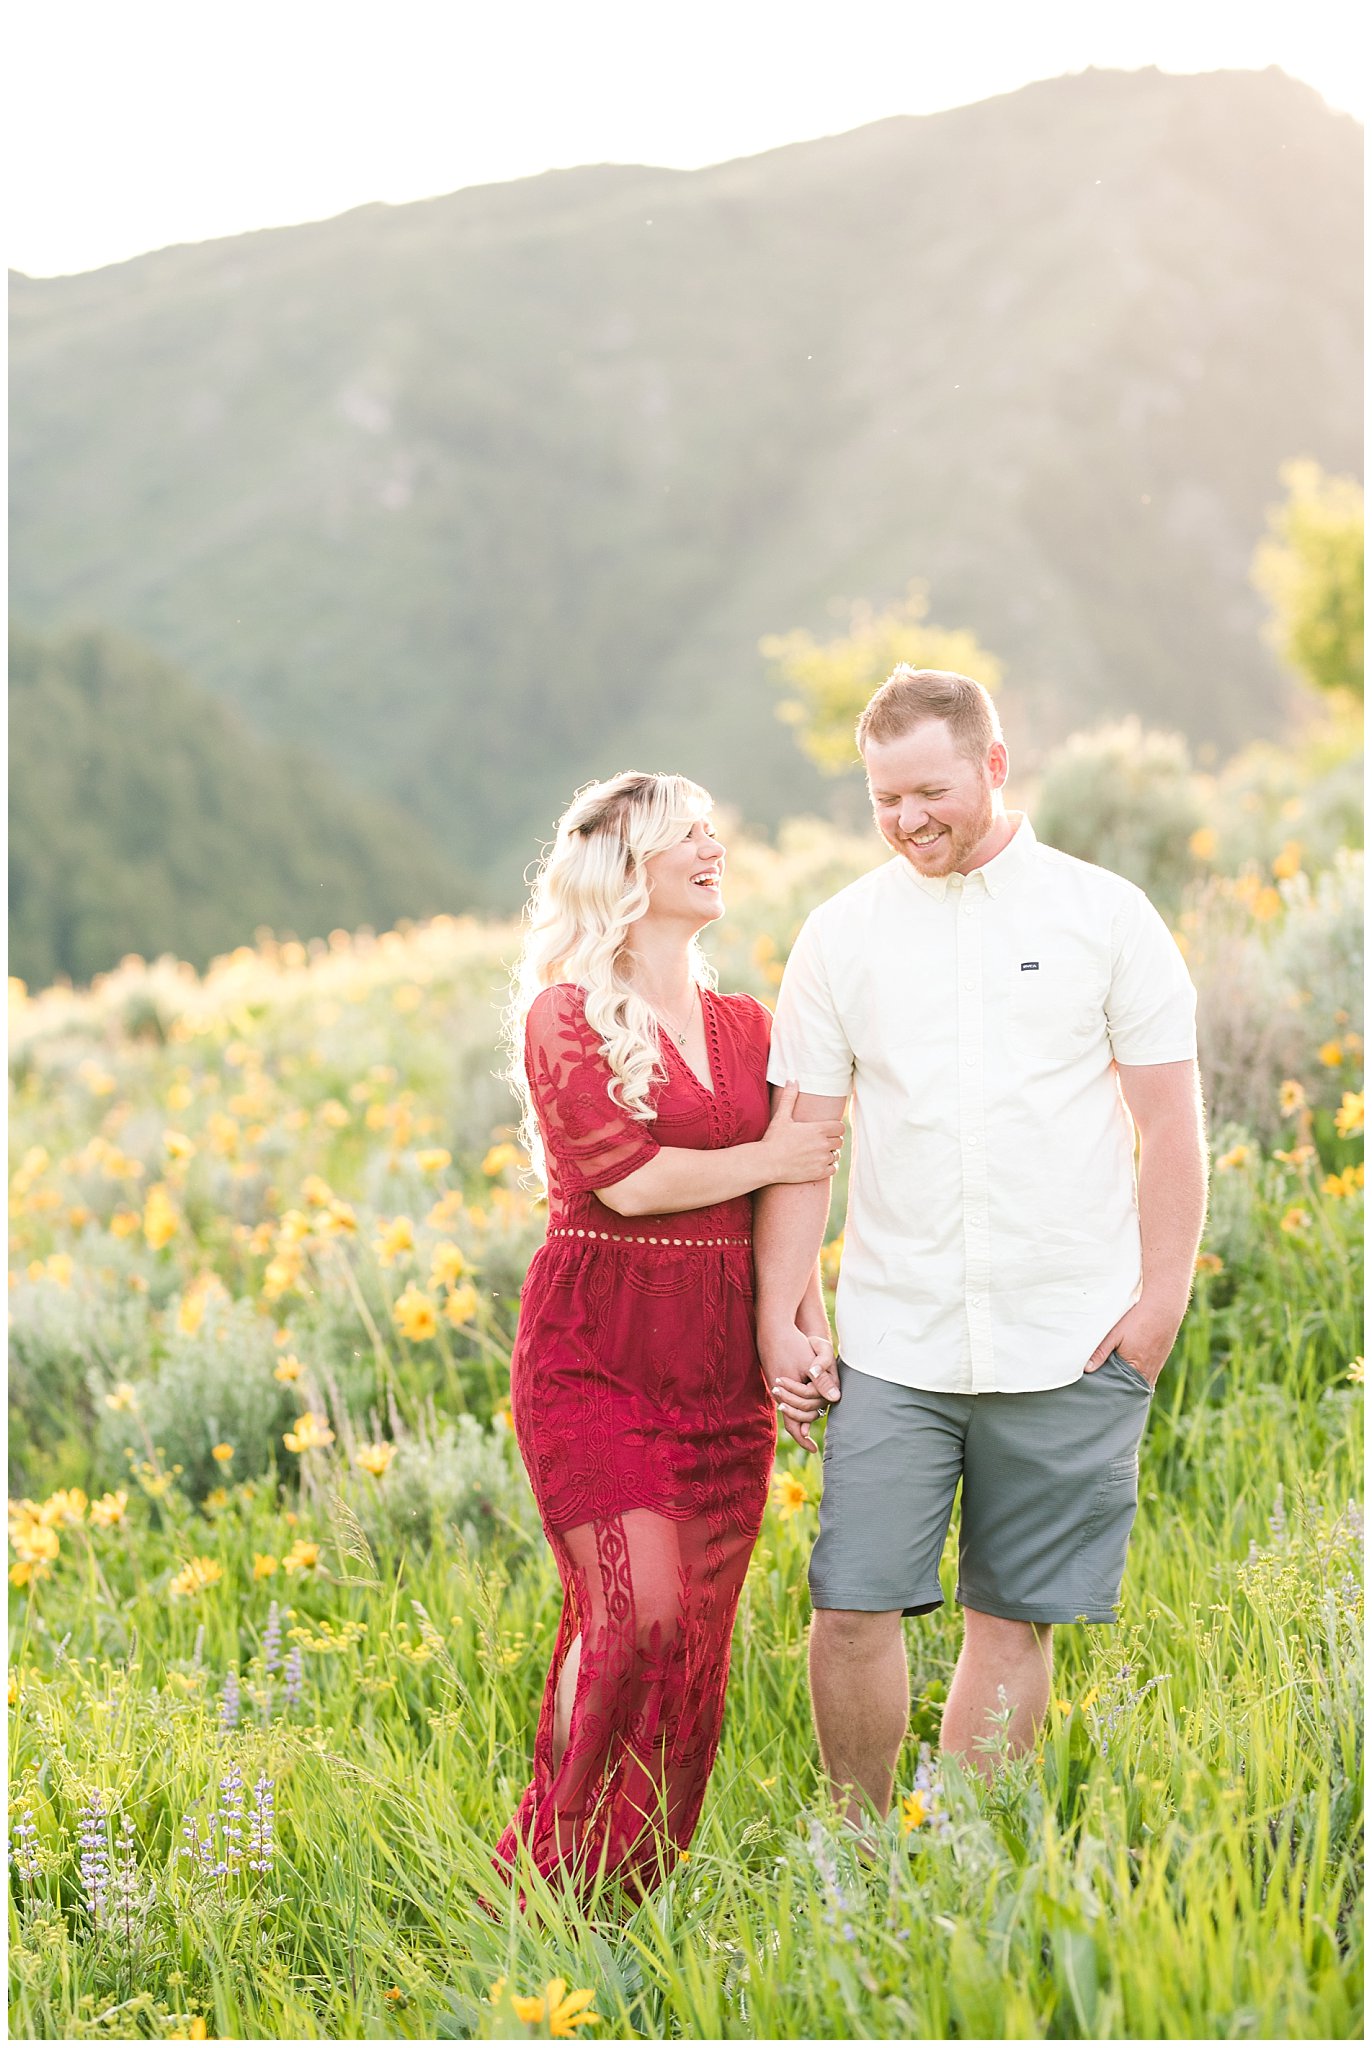 Couple in red lace dress in the sunflowers with mountain peaks | Wildflower Engagement in the Utah Mountains | Utah Engagement Photography | Jessie and Dallin Photography